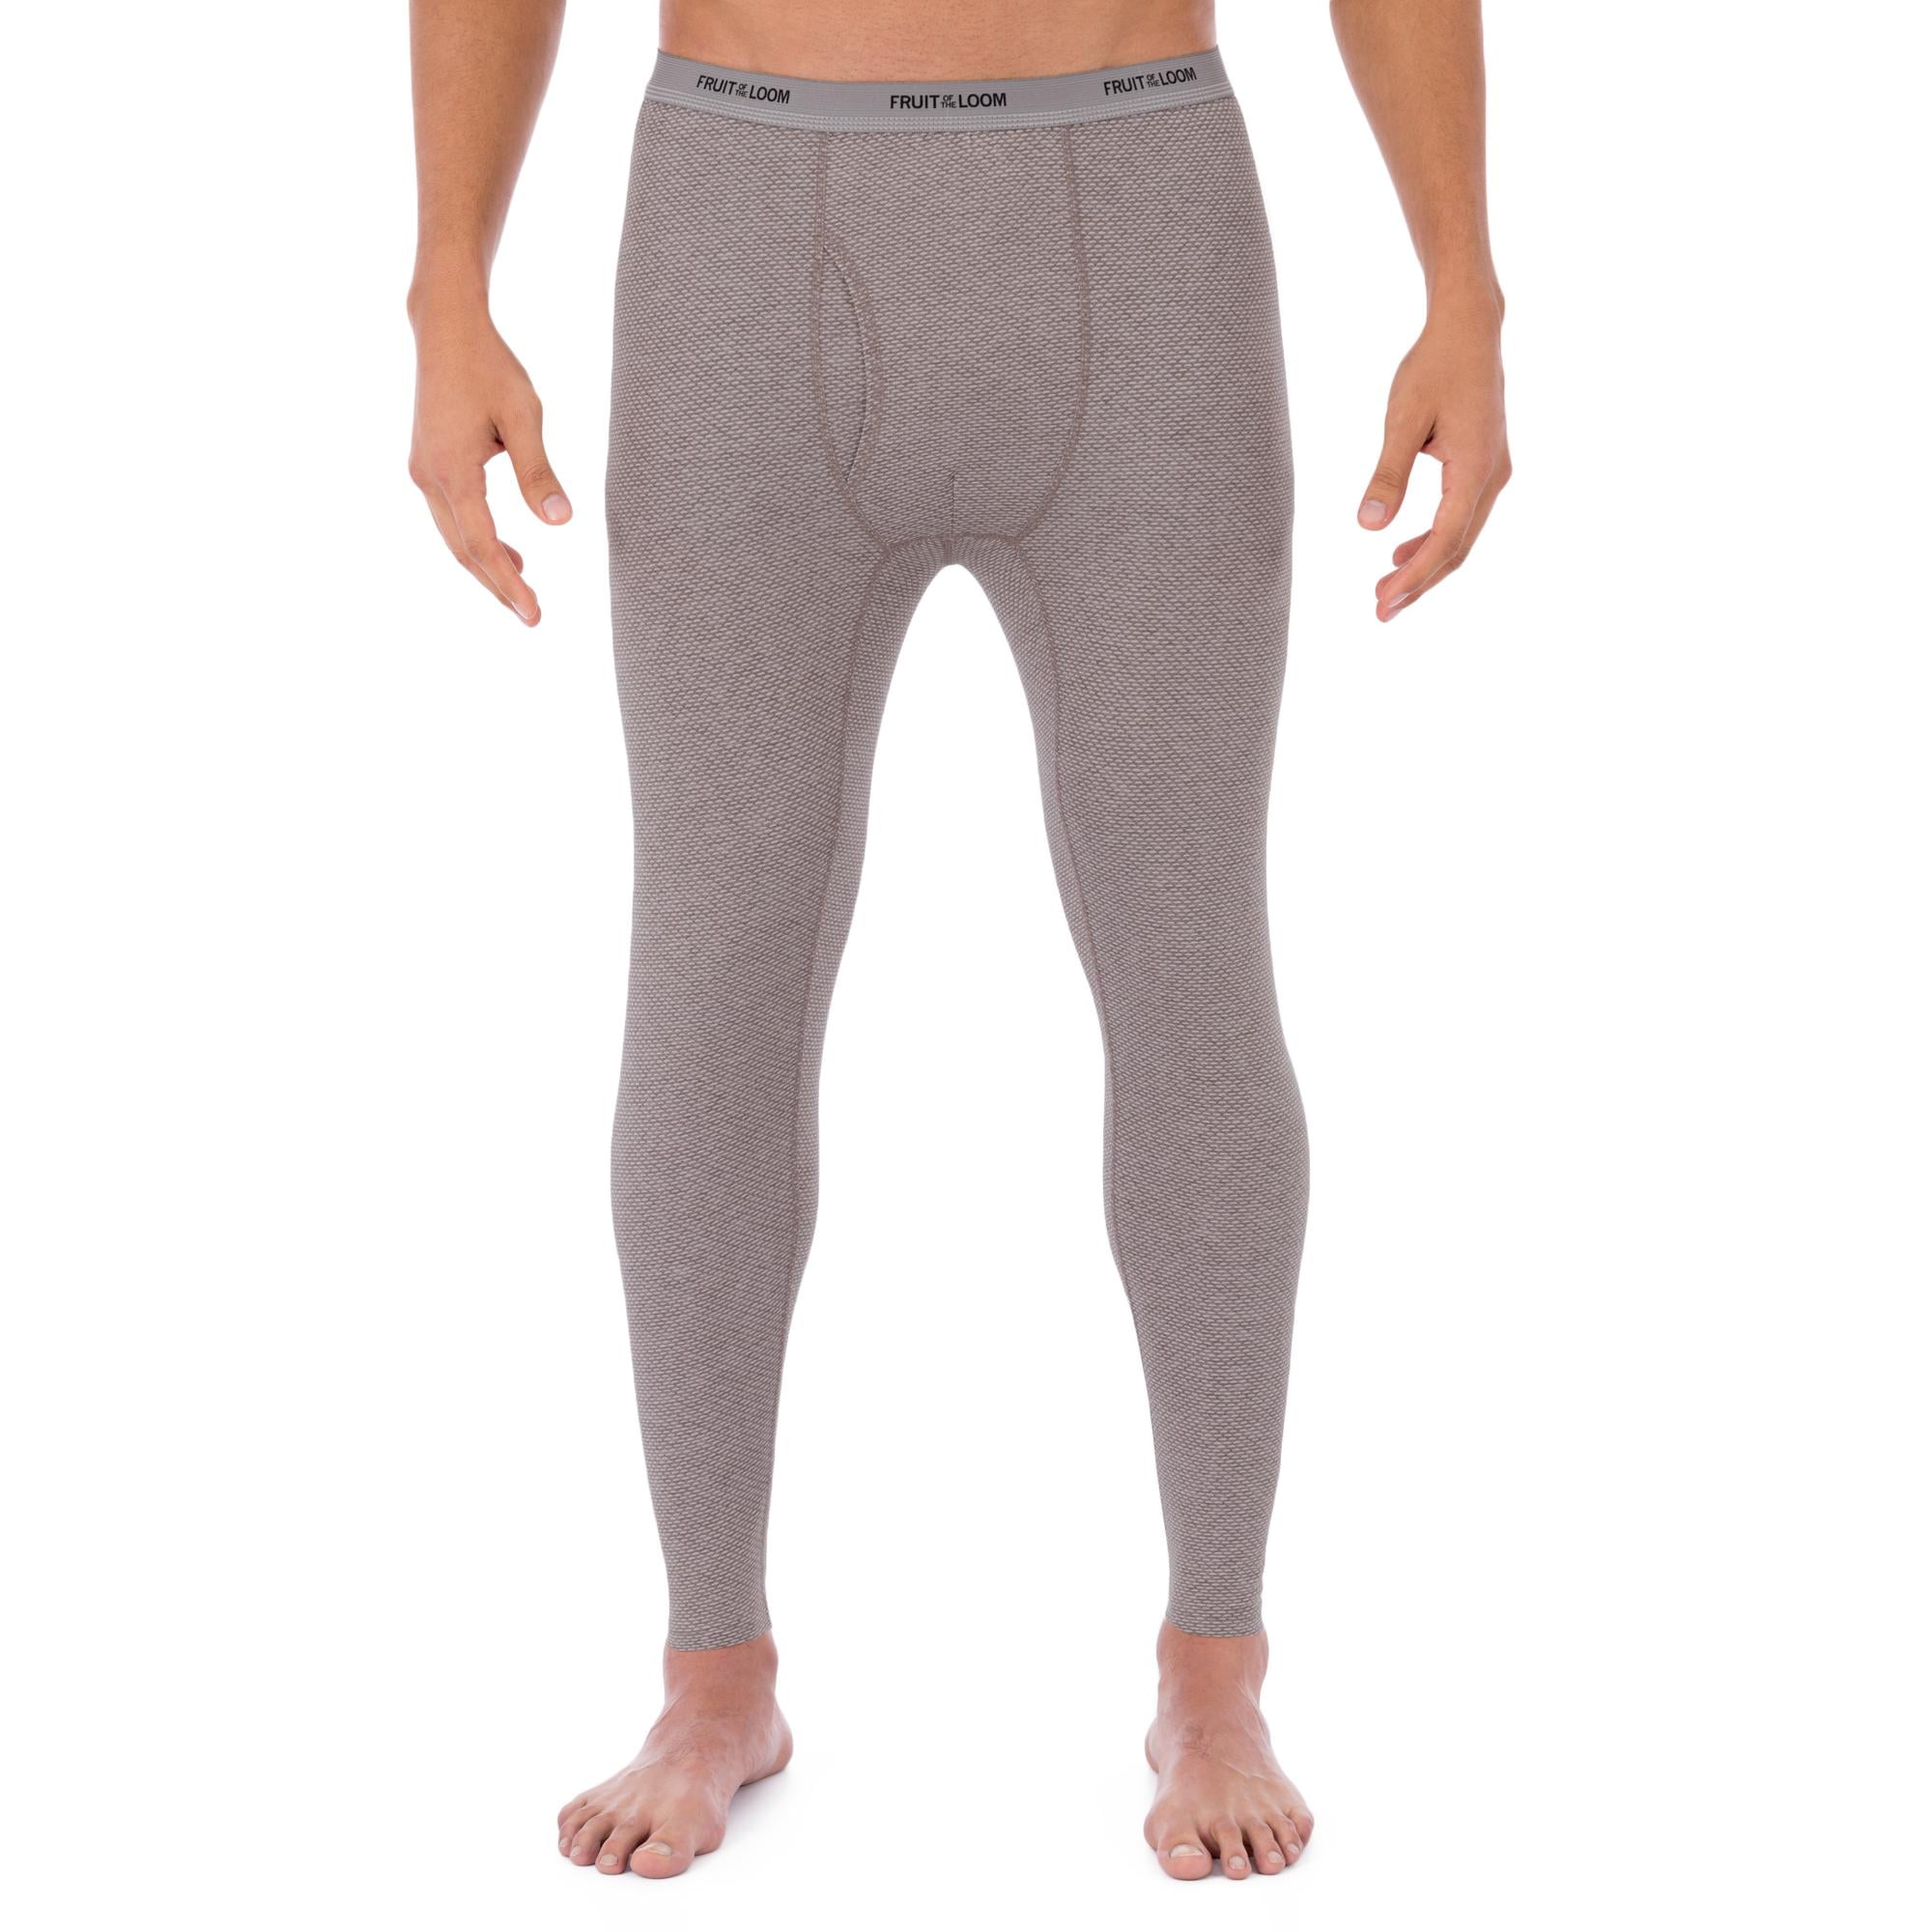 Fruit of the Loom Men's Breathable Super Cozy Thermal Pant Underwear for Men